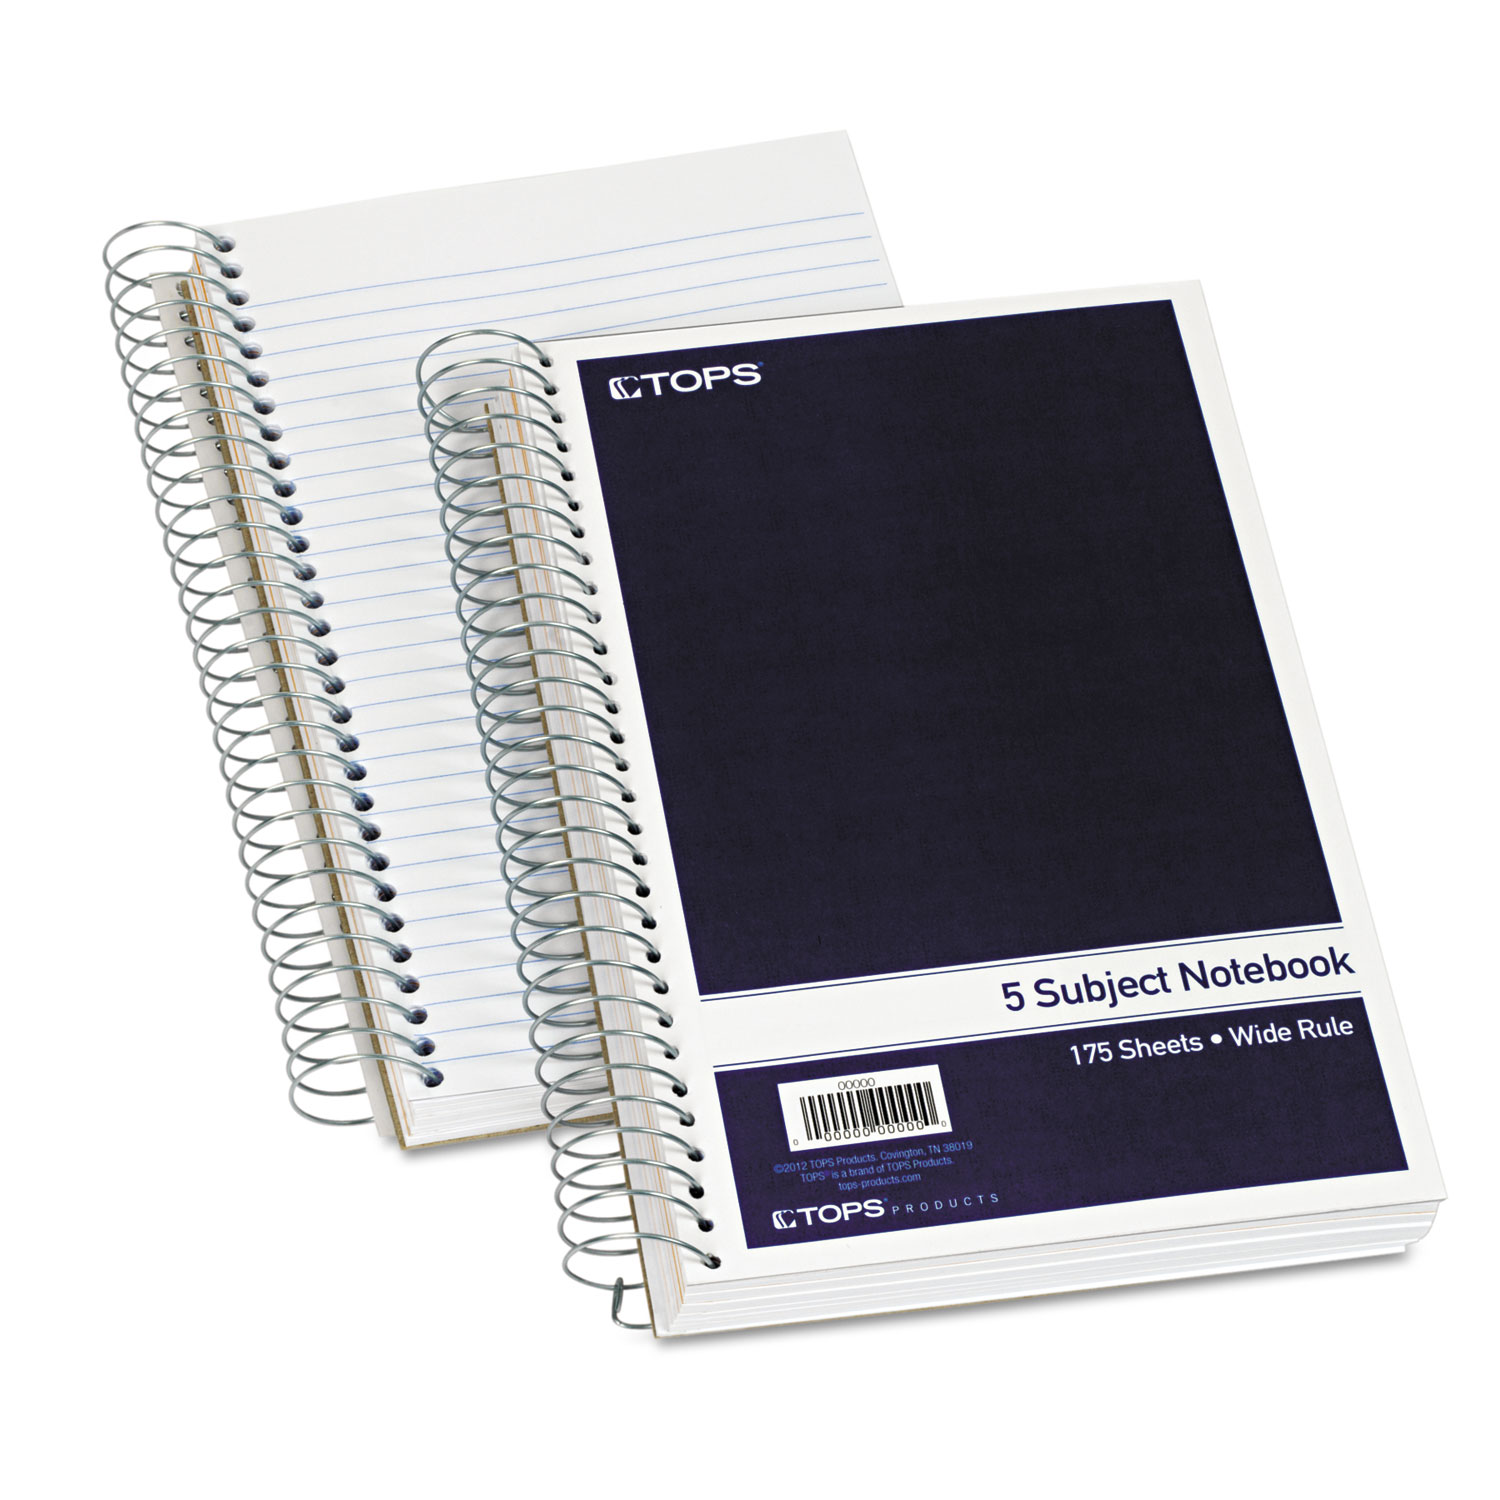  TOPS 63859 Wirebound Five-Subject Notebook, 5 Subjects, Wide/Legal Rule, Navy Cover, 9.5 x 6, 175 Sheets (TOP63859) 